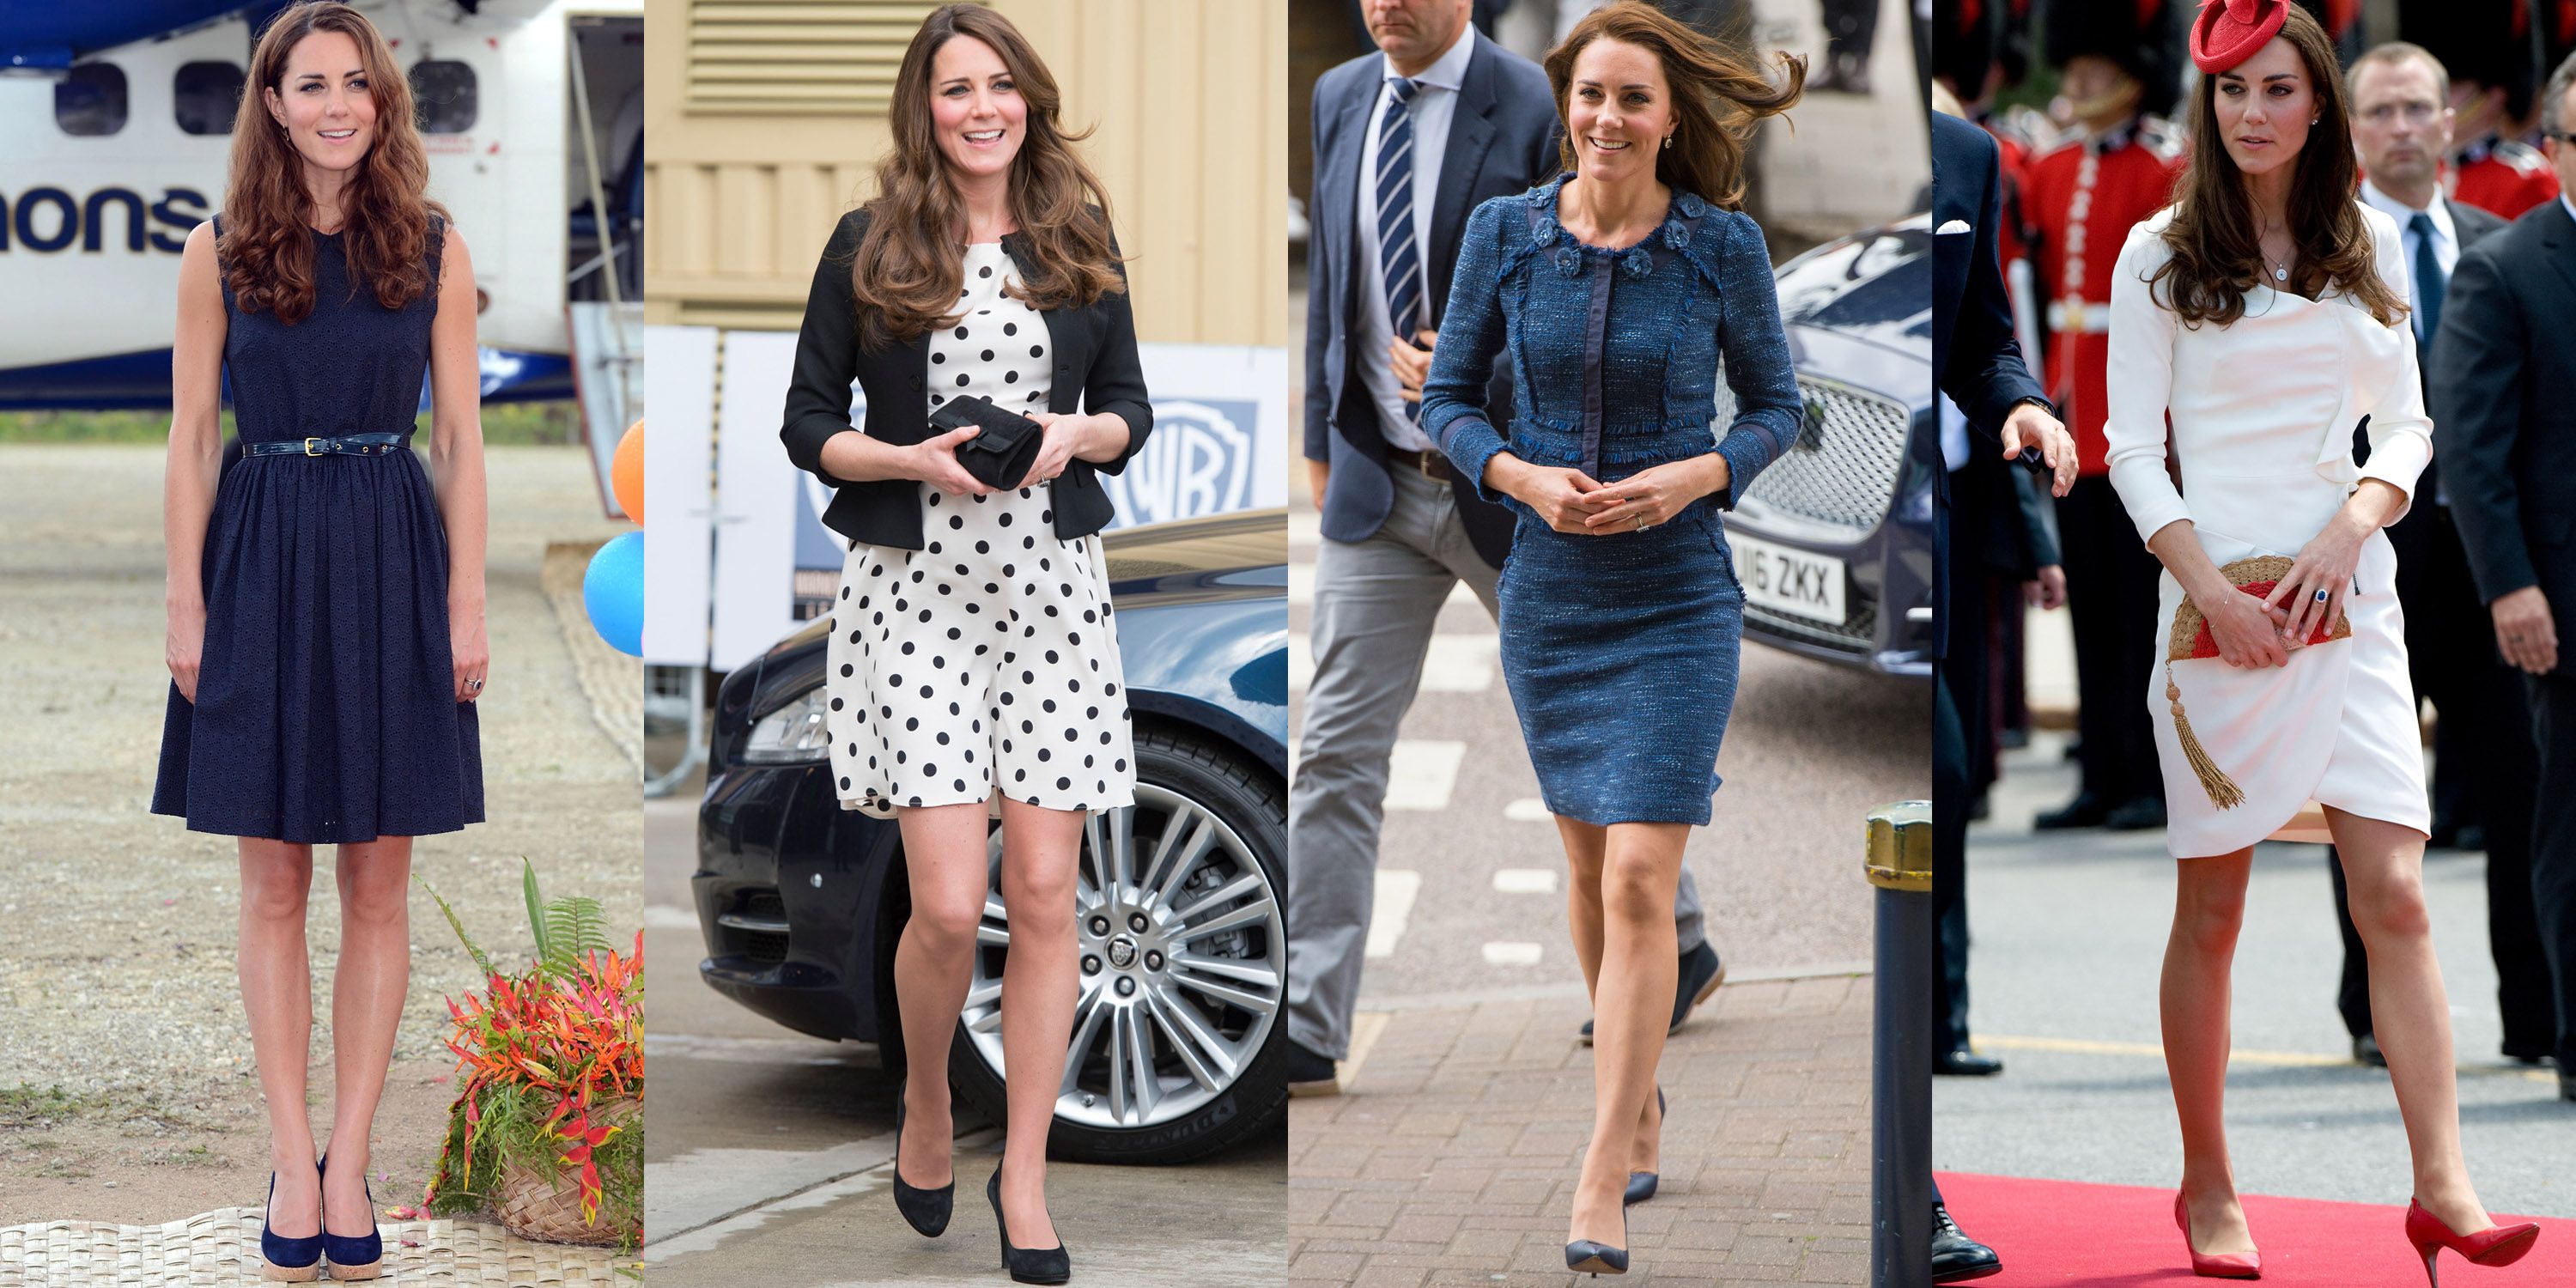 See Kate Middleton's Best Looks From High Fashion to Low Cost | Vanity Fair